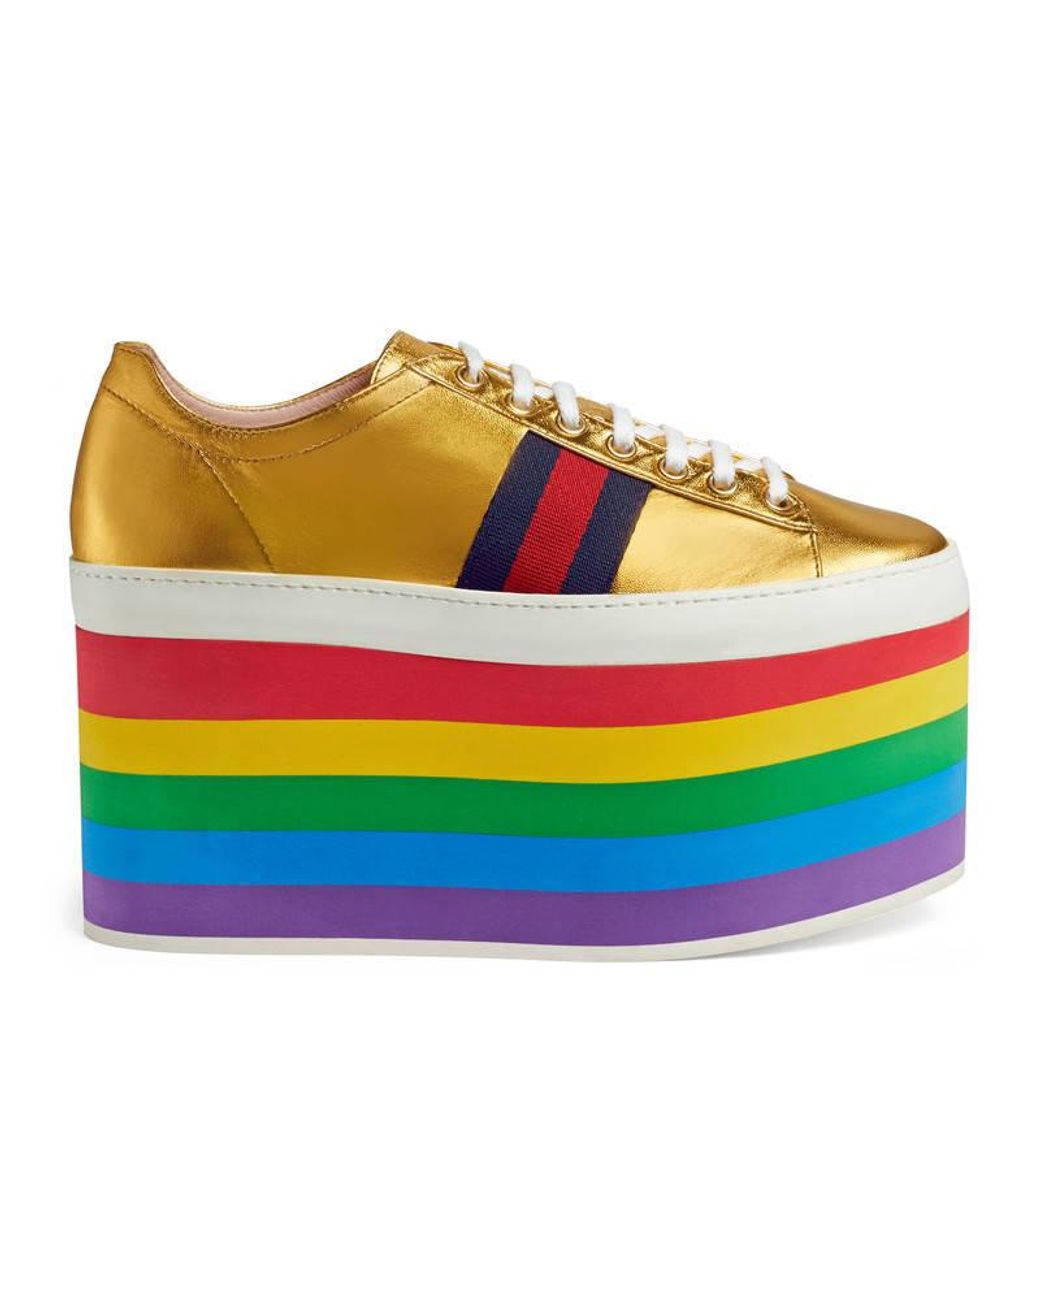 Gucci Peggy Rainbow Platform Leather Sneakers | Lyst